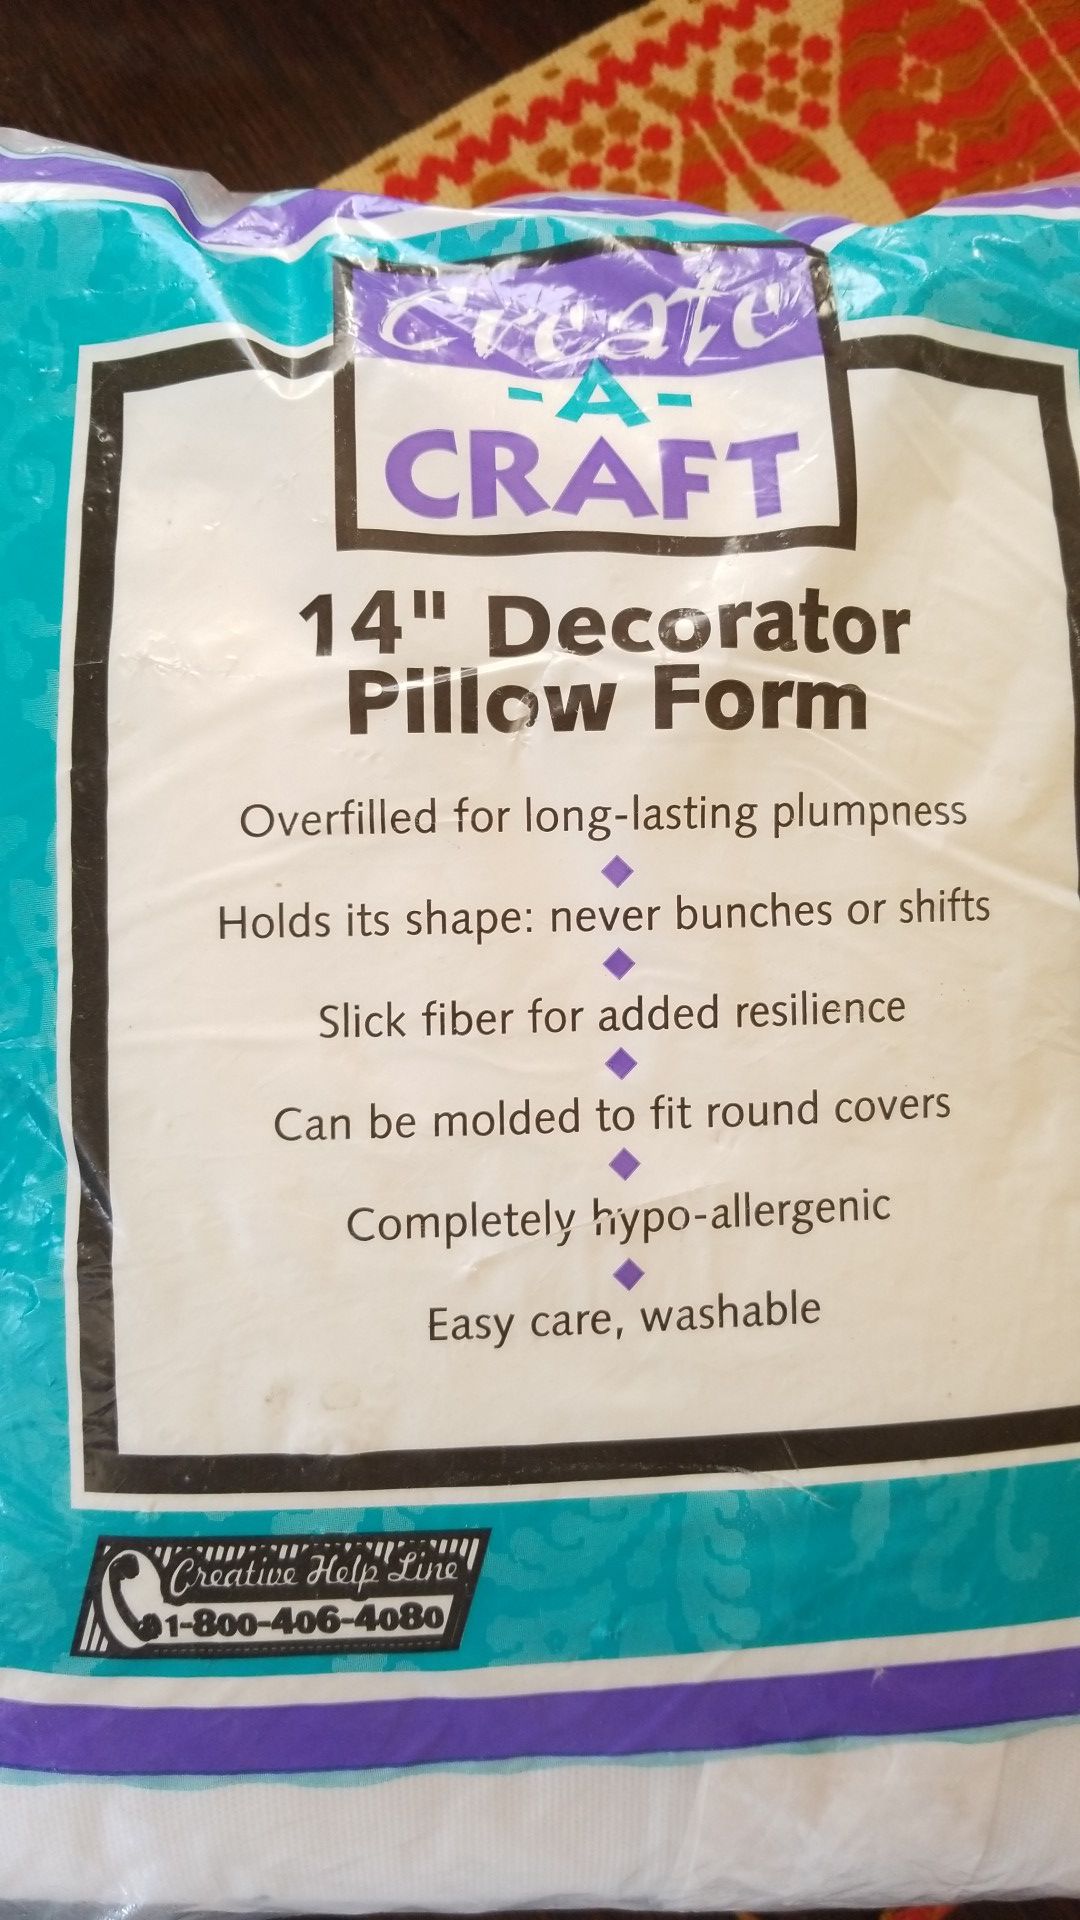 Craft Make your own Pillows